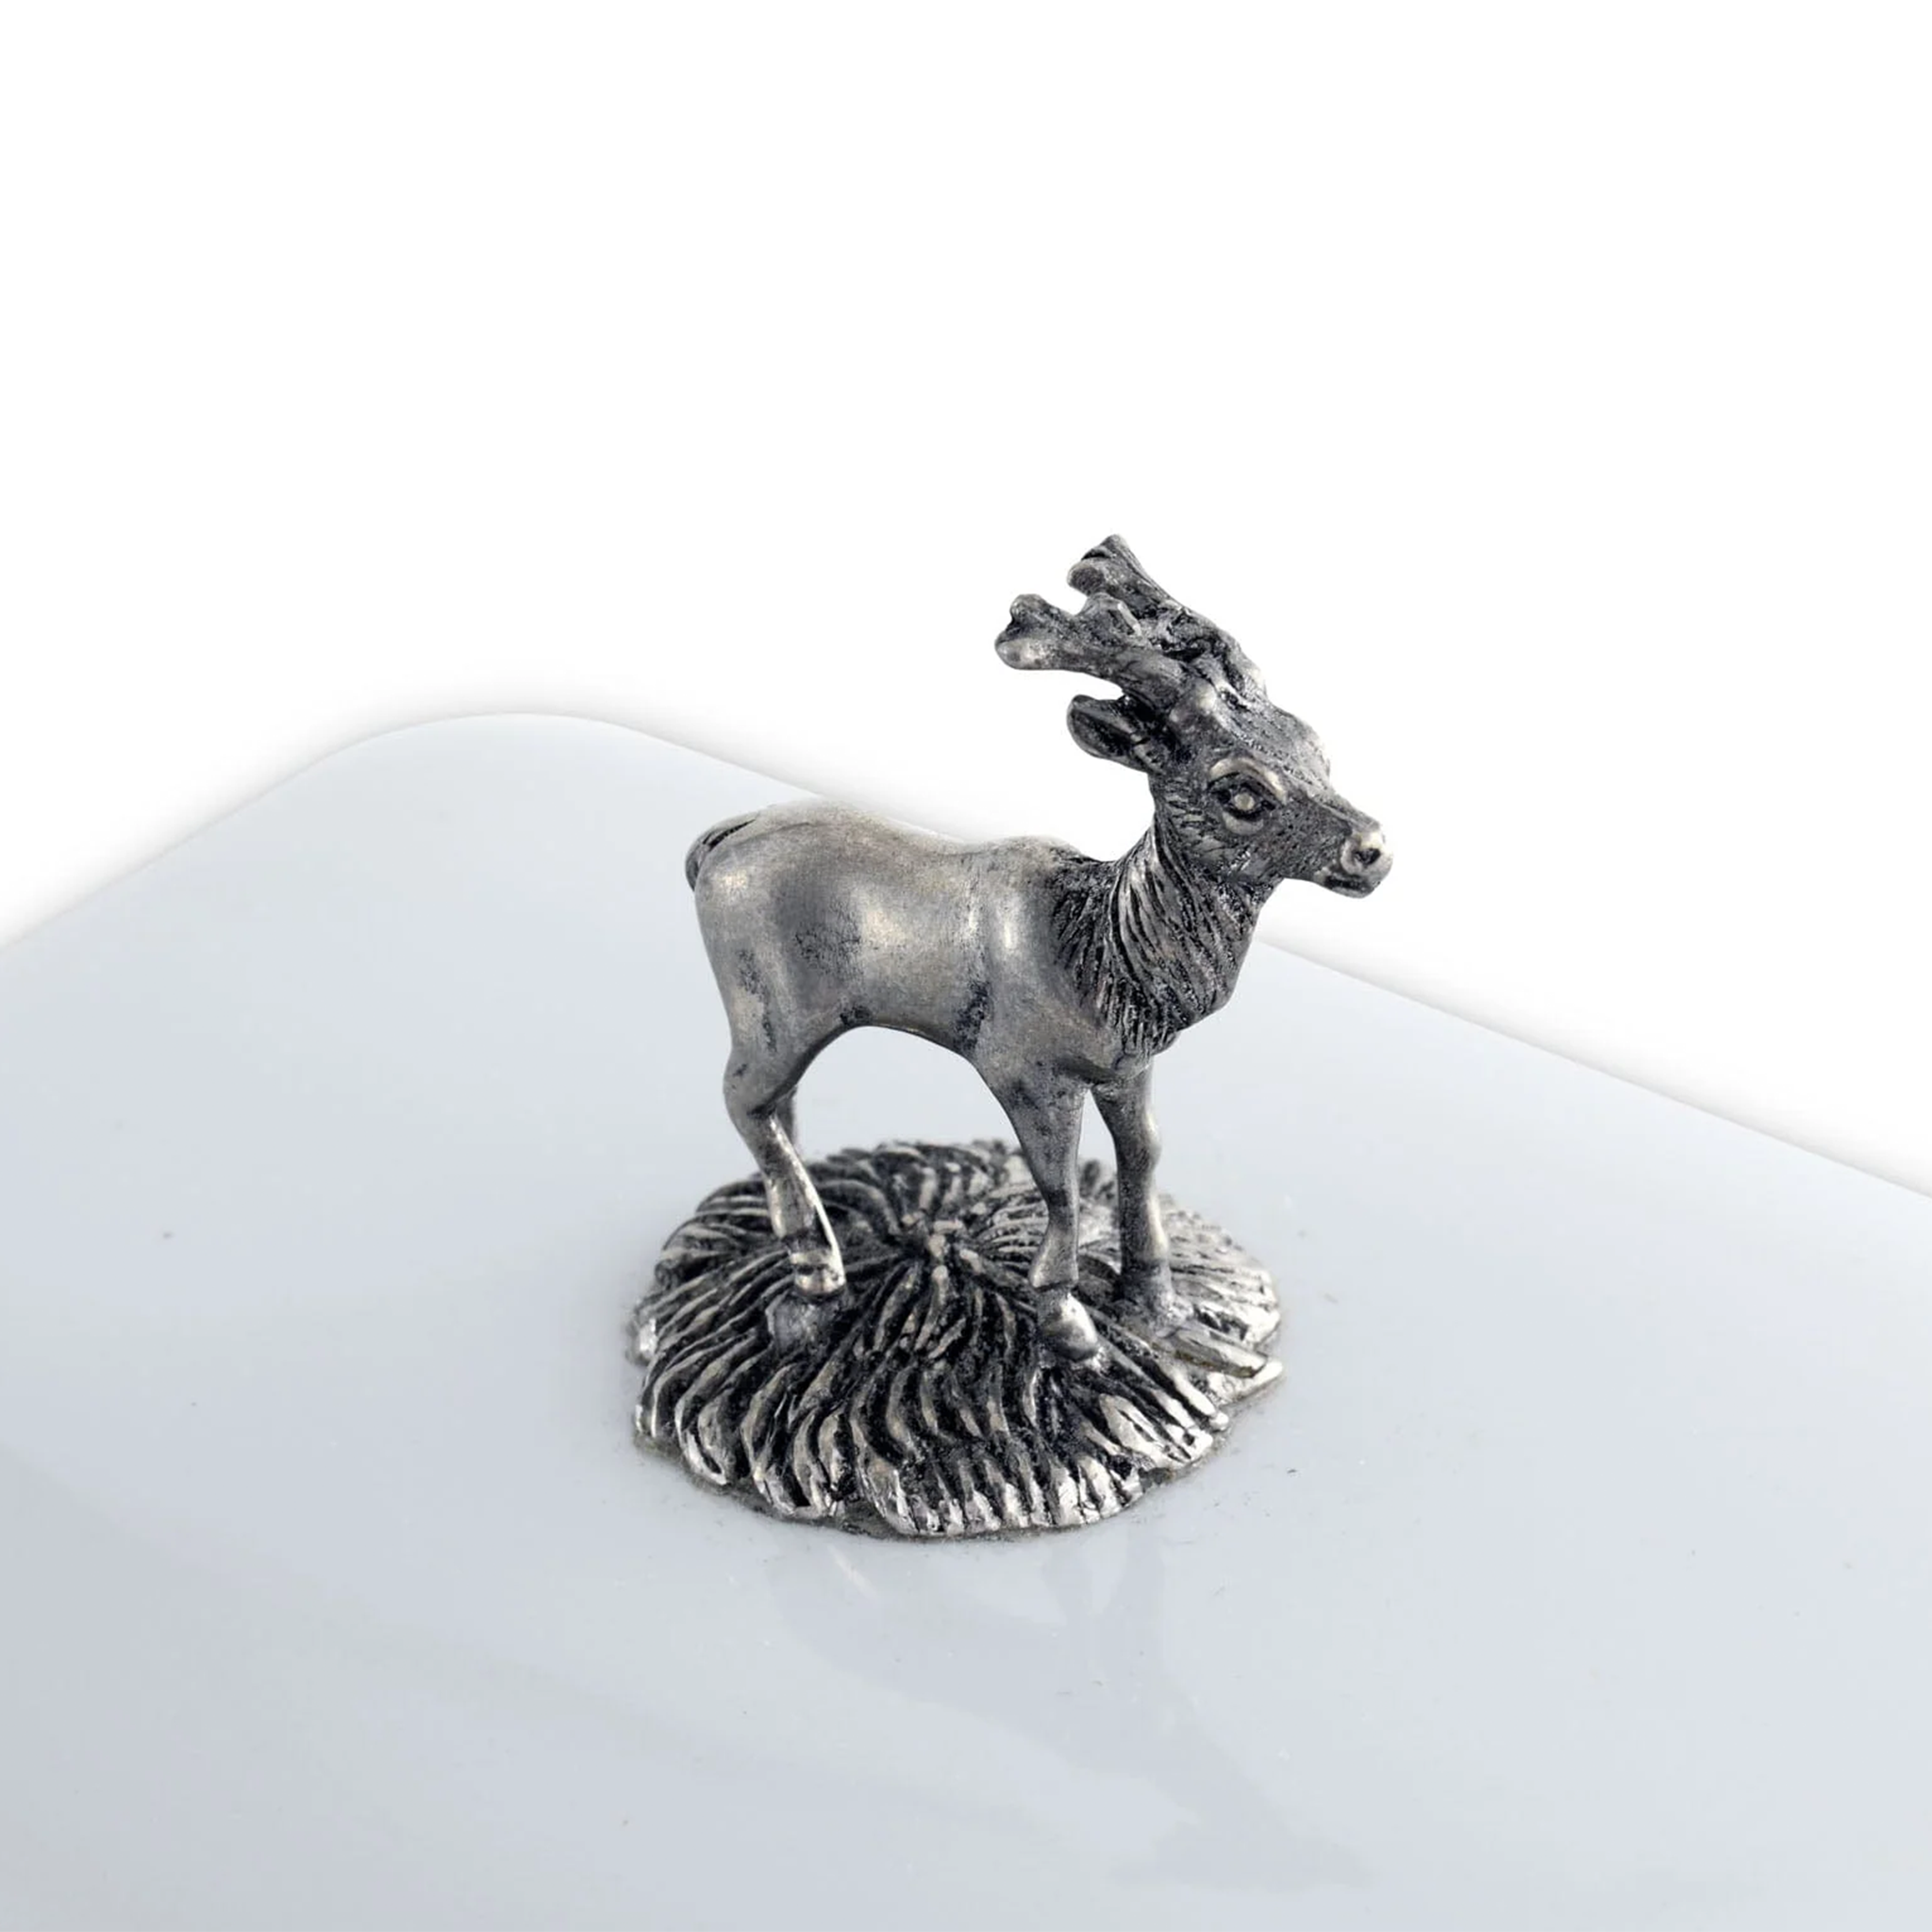 a pewter stag figure on top of a w white butter dish